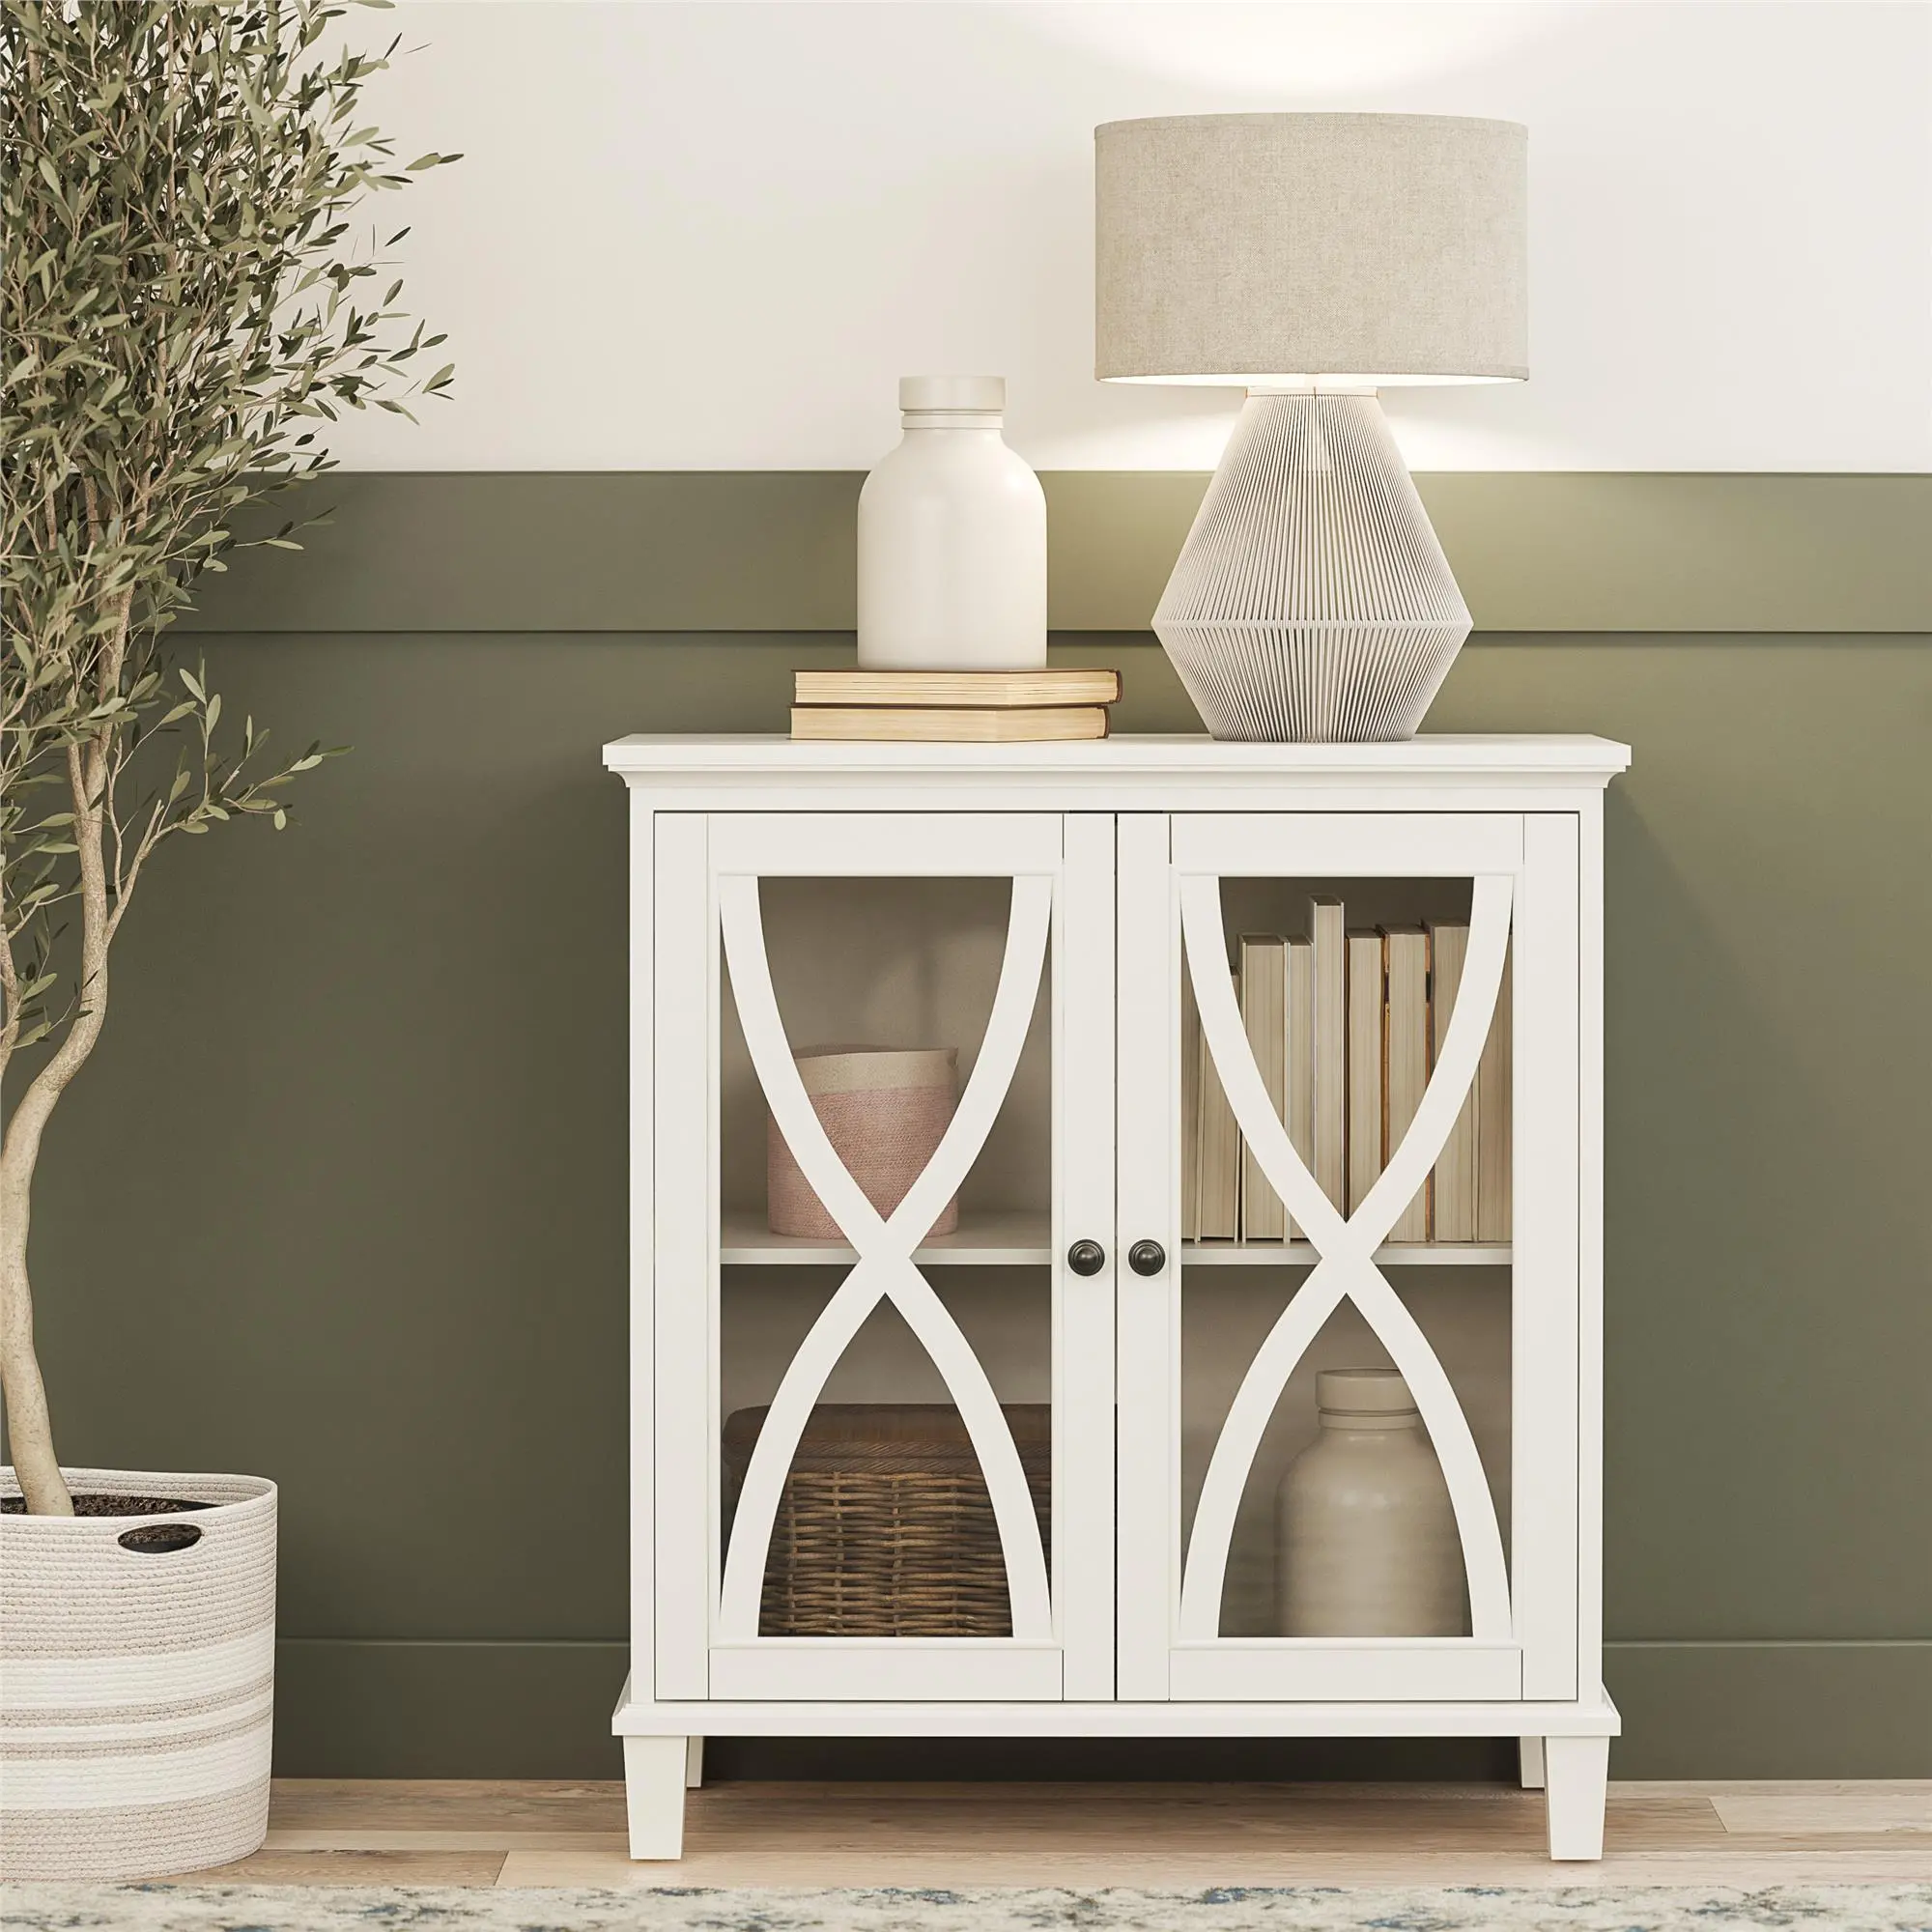 Photos - Dresser / Chests of Drawers Dorel Home Celeste White Accent Cabinet with Glass Doors 9985013COM